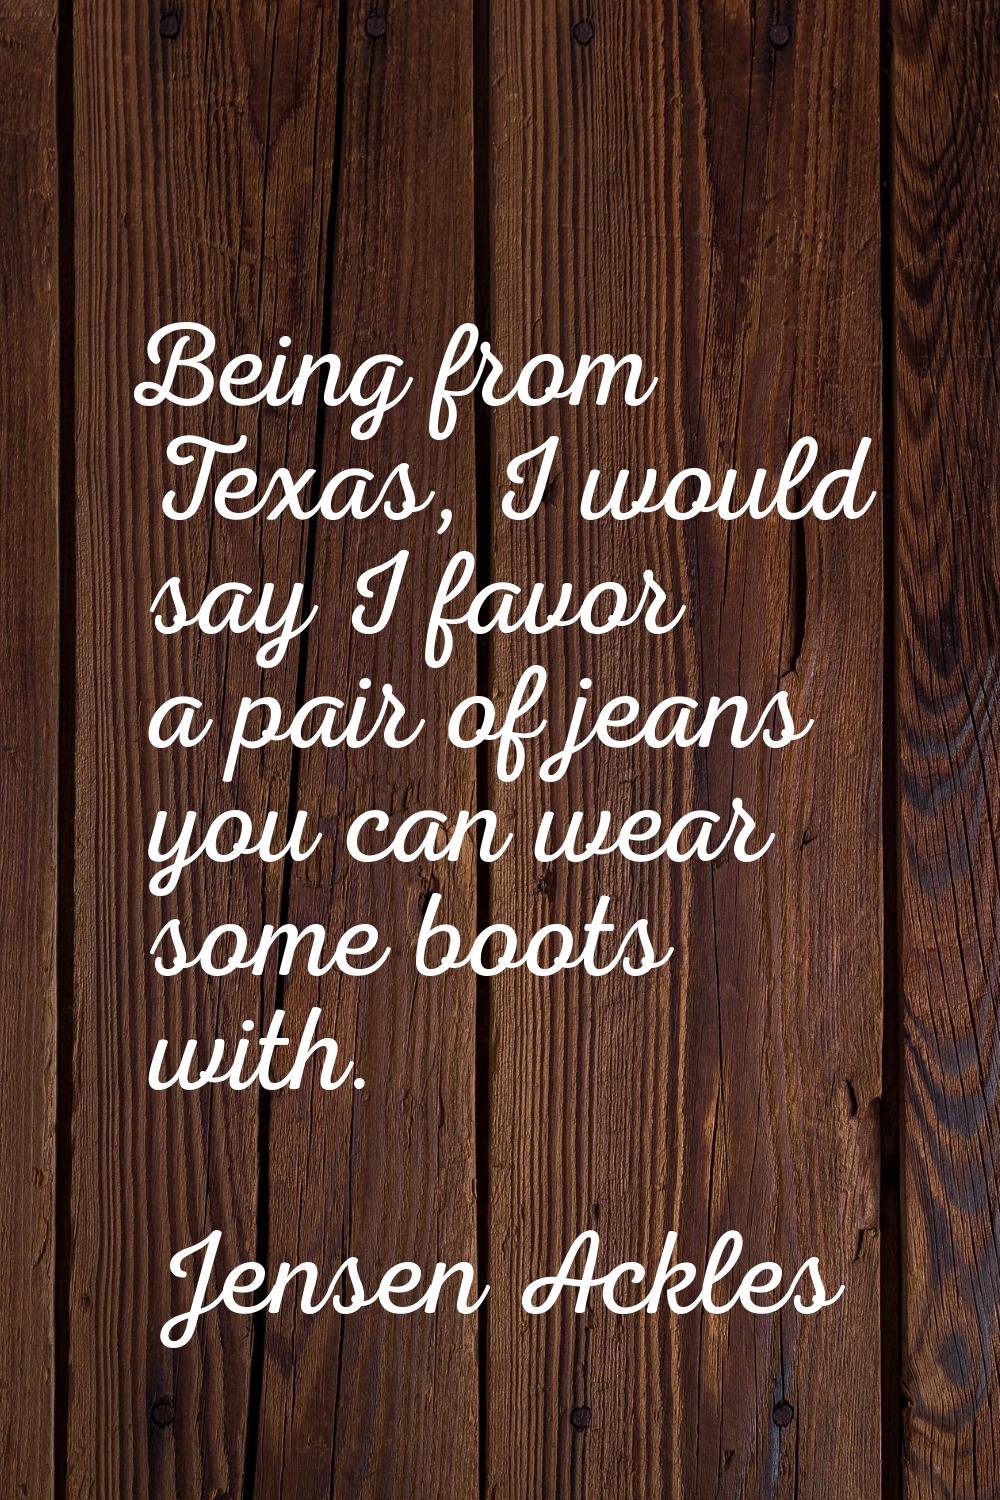 Being from Texas, I would say I favor a pair of jeans you can wear some boots with.